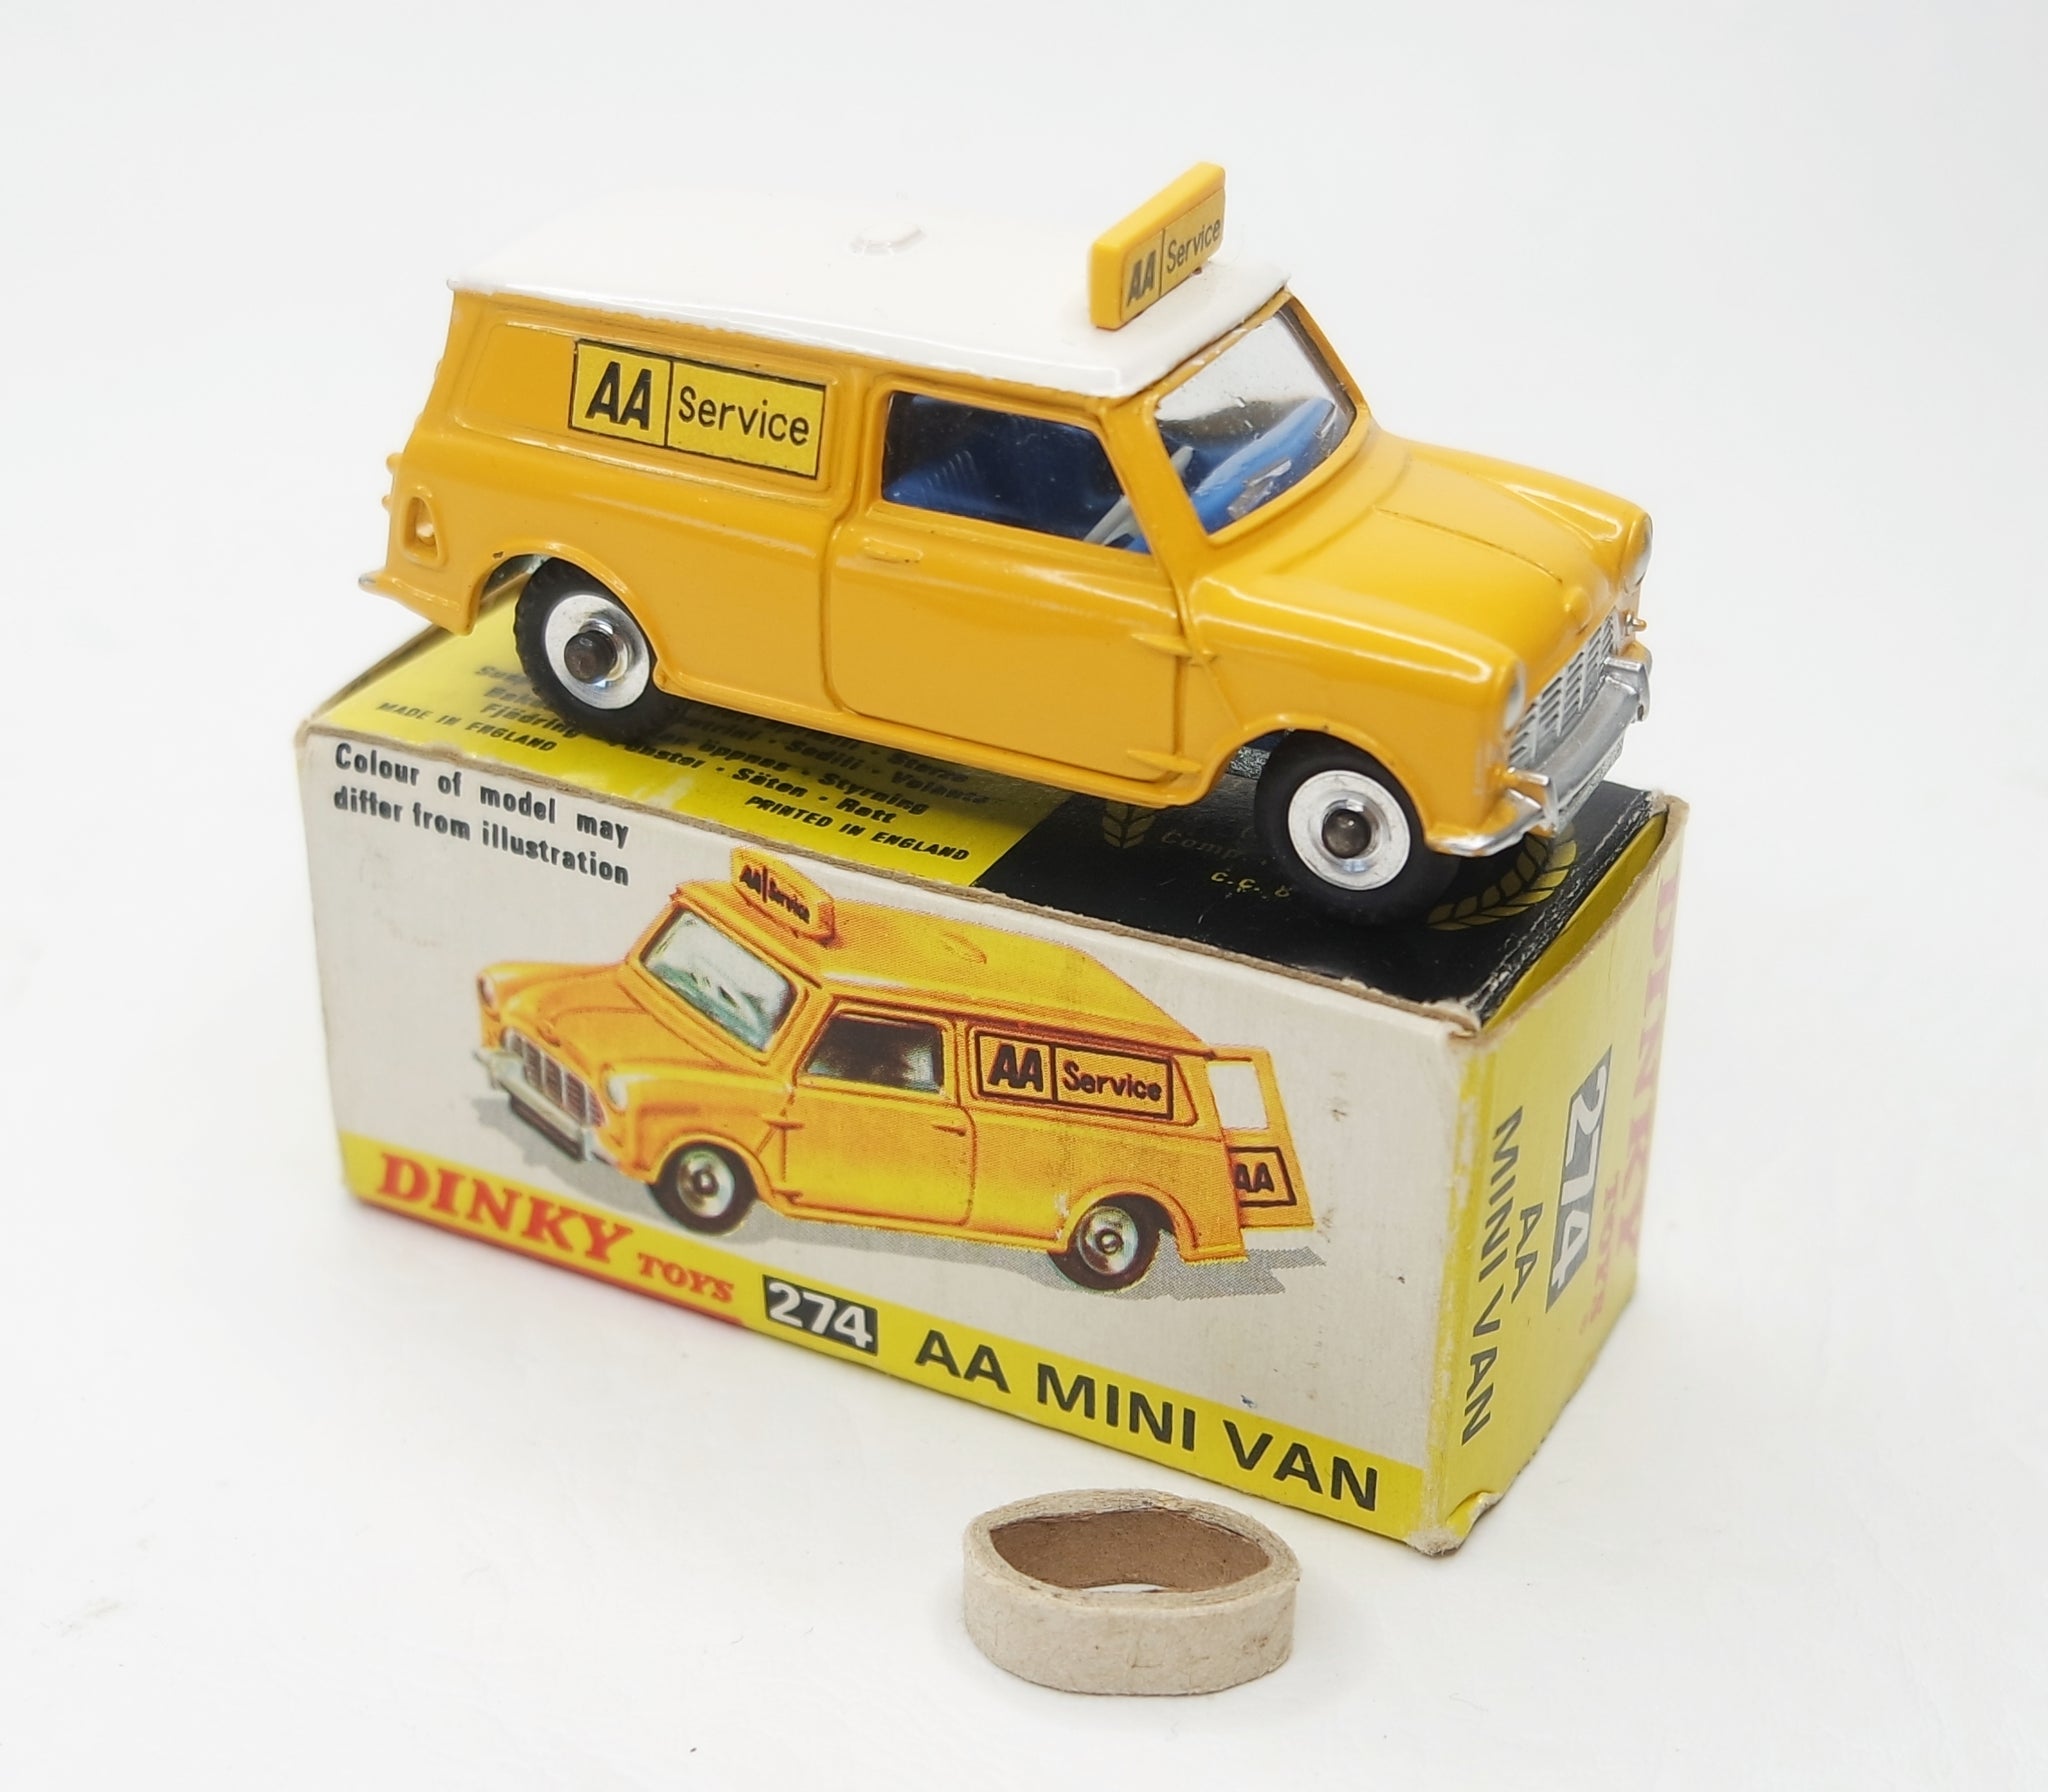 Dinky toy van fetches £6,400 in furious bidding at auction, Toys